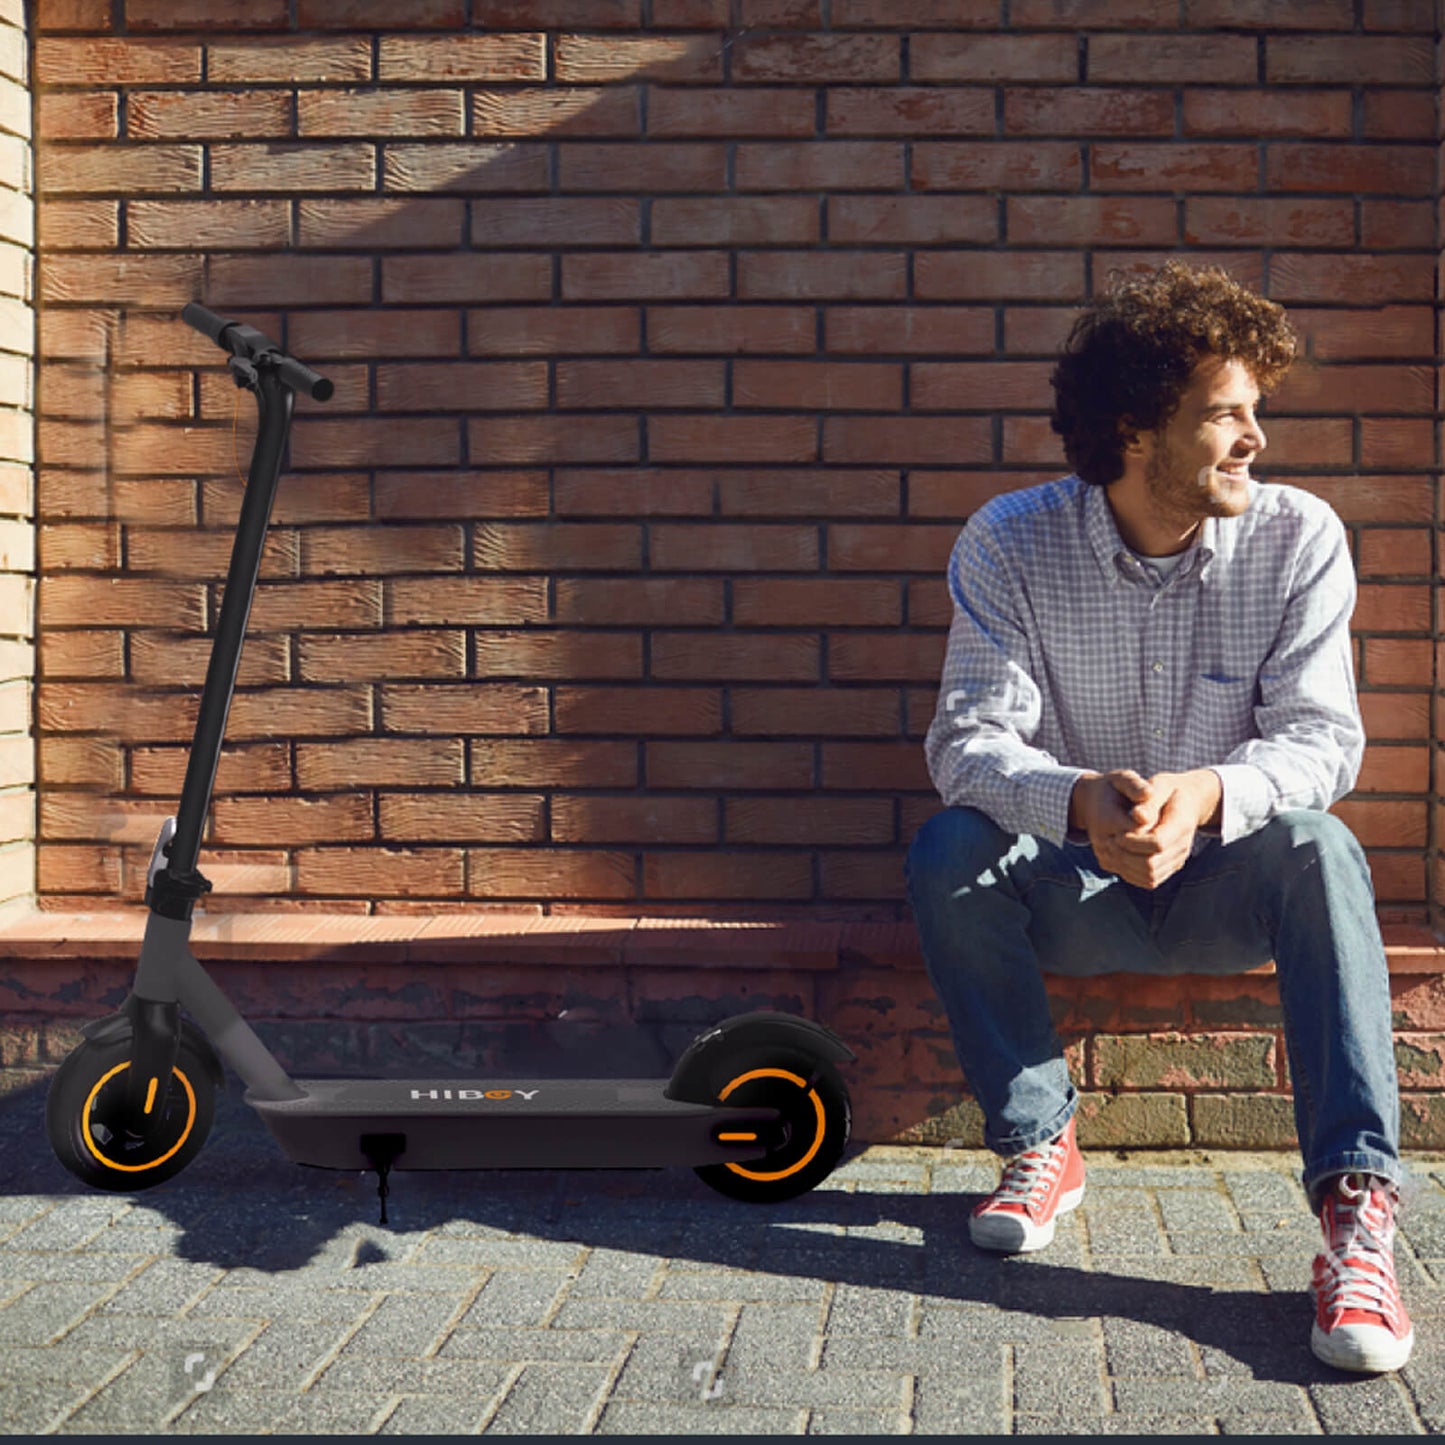 Hiboy S2 Max Electric Scooter - Hiboy